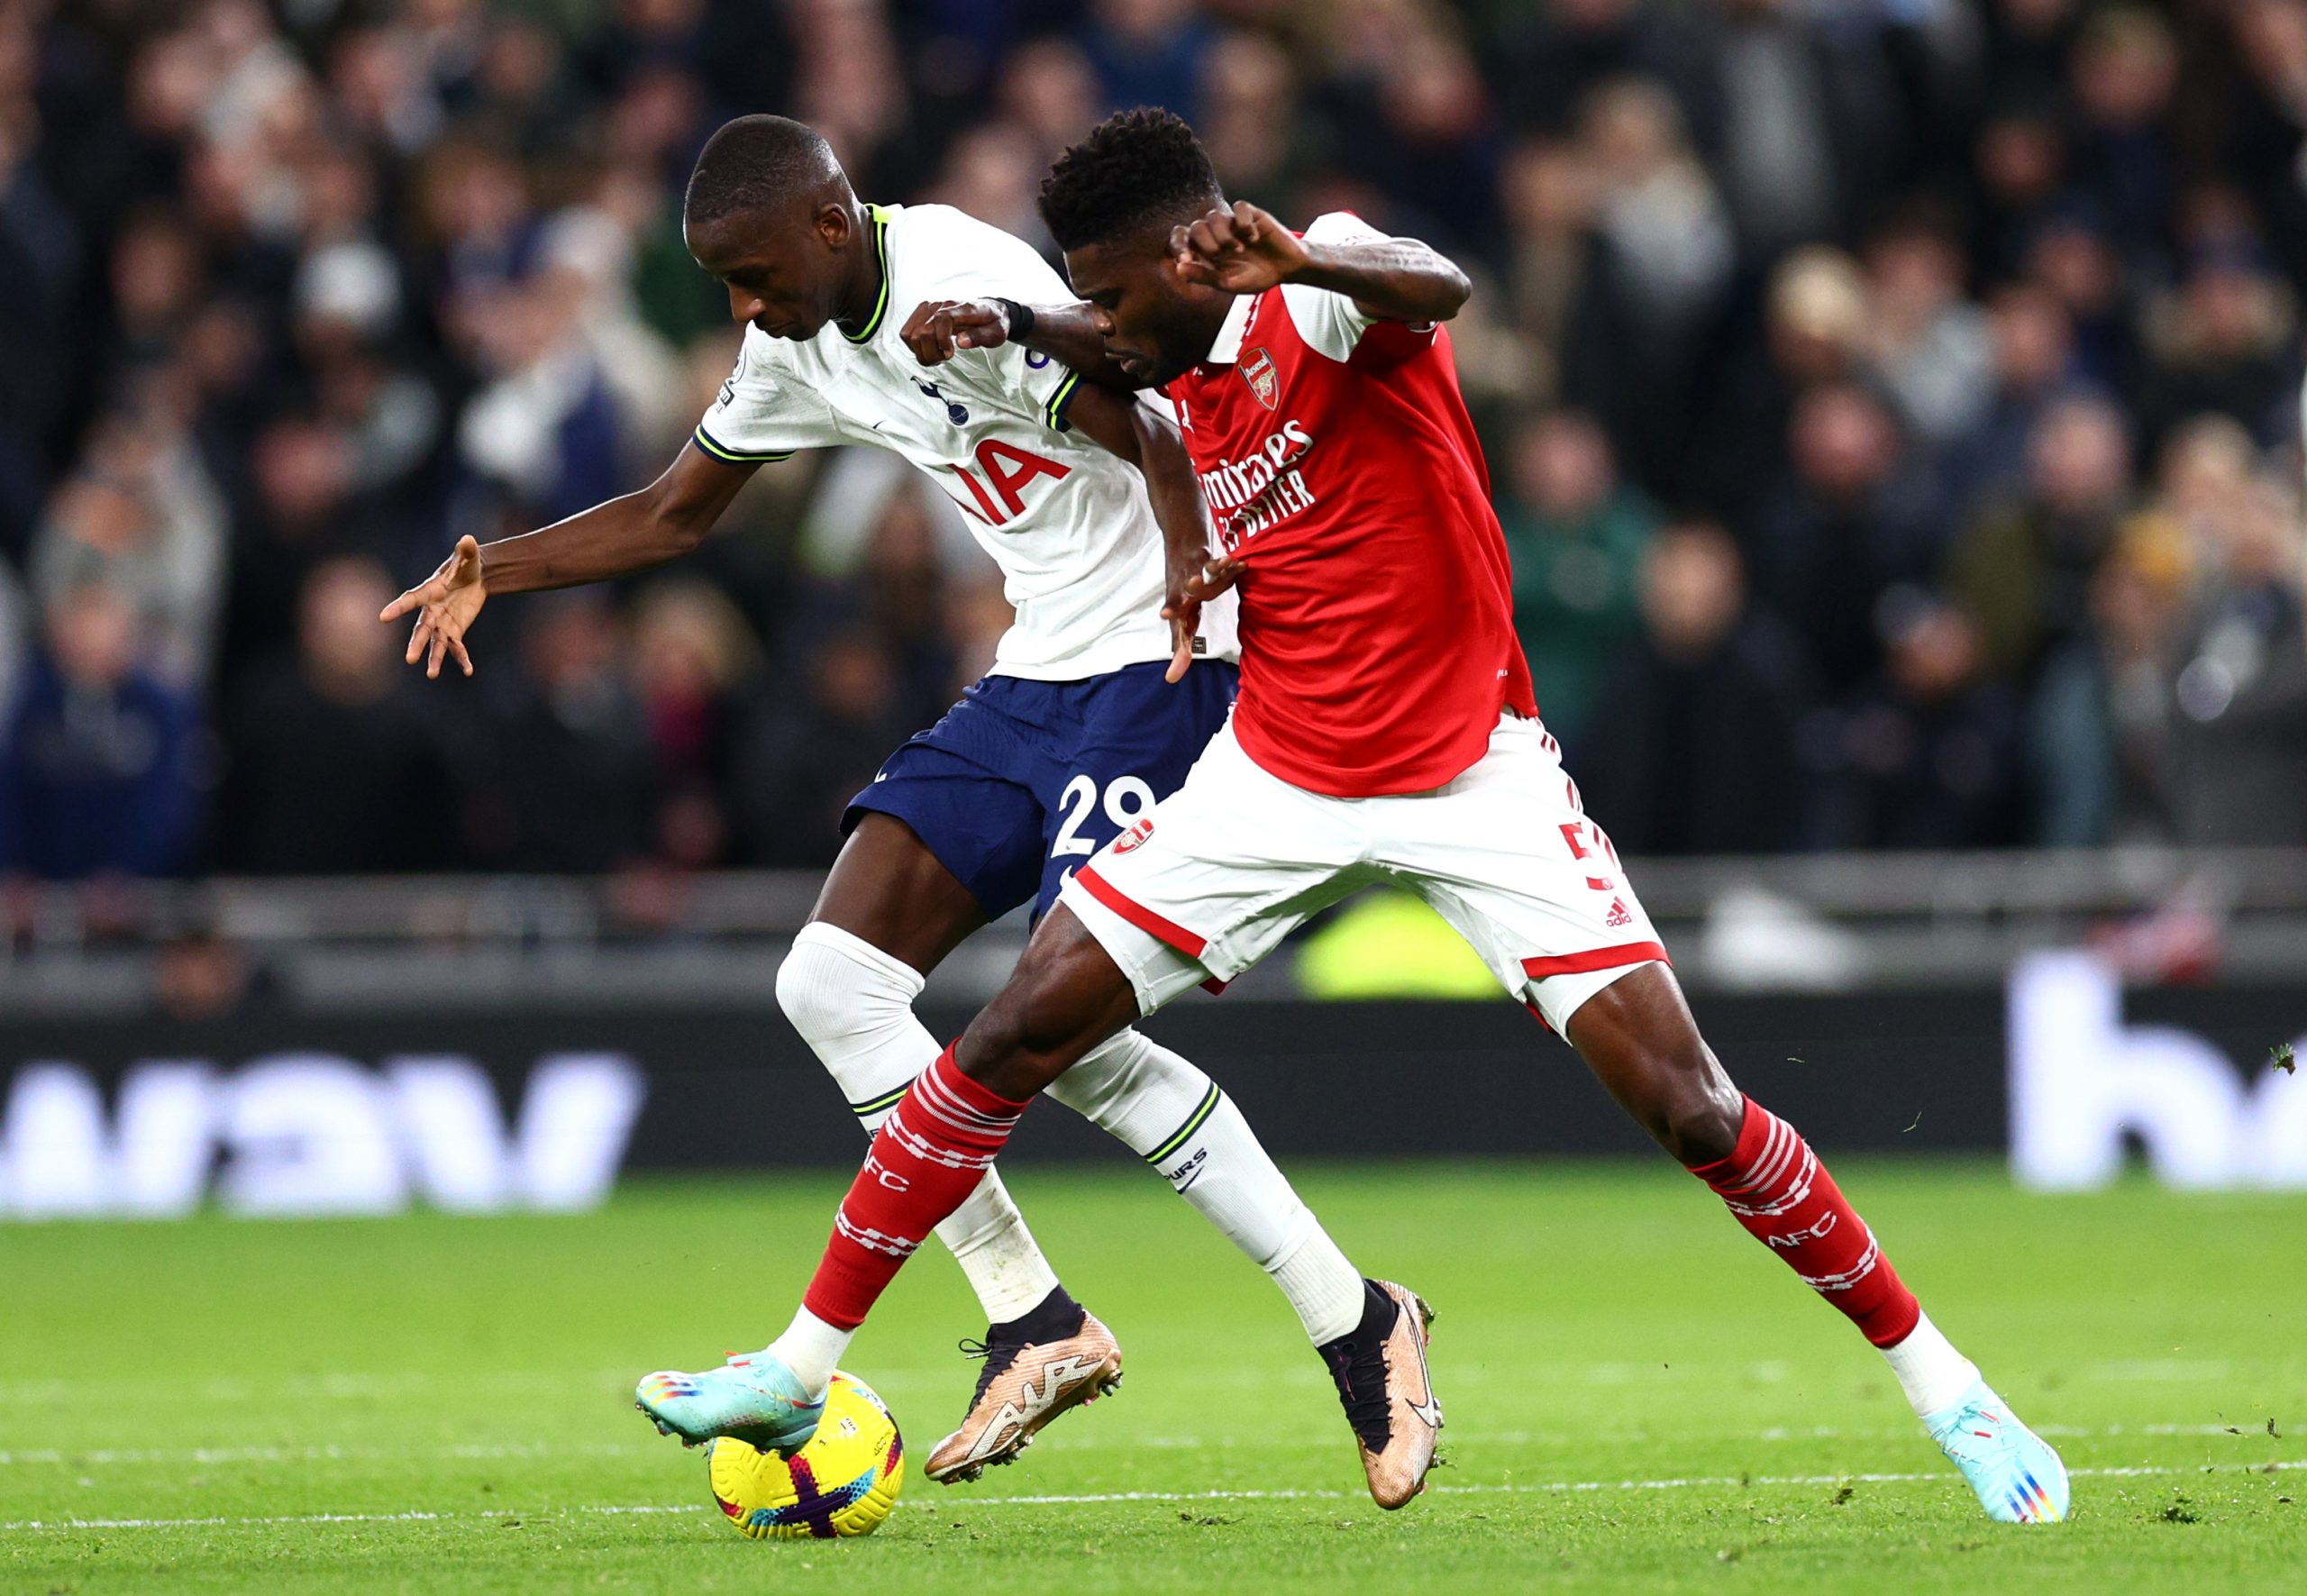 Pape Matar Sarr of Tottenham Hotspur battles for possession with Thomas Partey of Arsenal during the Premier League match between Tottenham Hotspur and Arsenal FC at Tottenham Hotspur Stadium on January 15, 2023 in London, England. (Photo by Clive Rose/Getty Images)